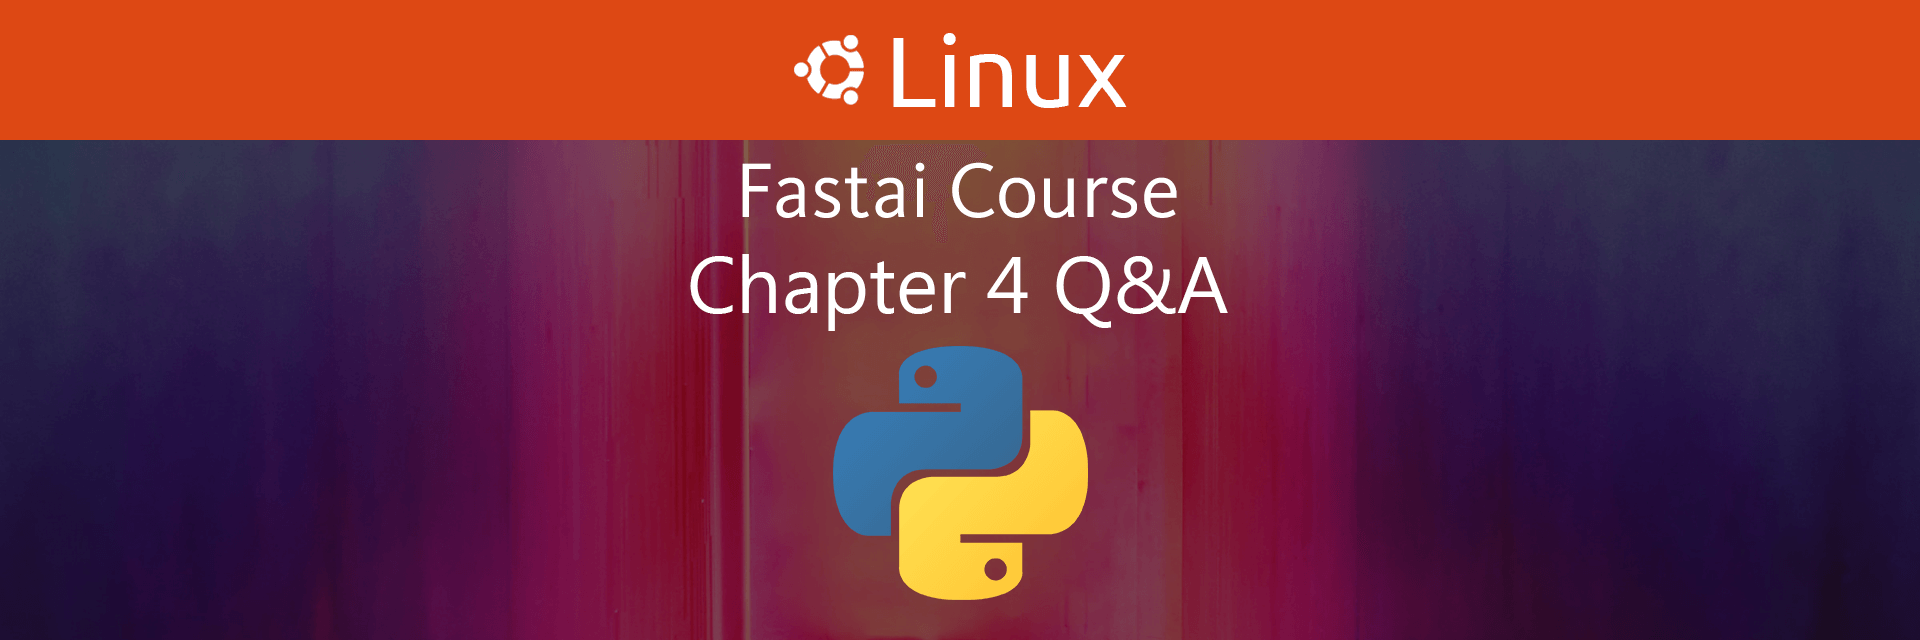 Fastai Course Chapter 4 Q&A on Linux